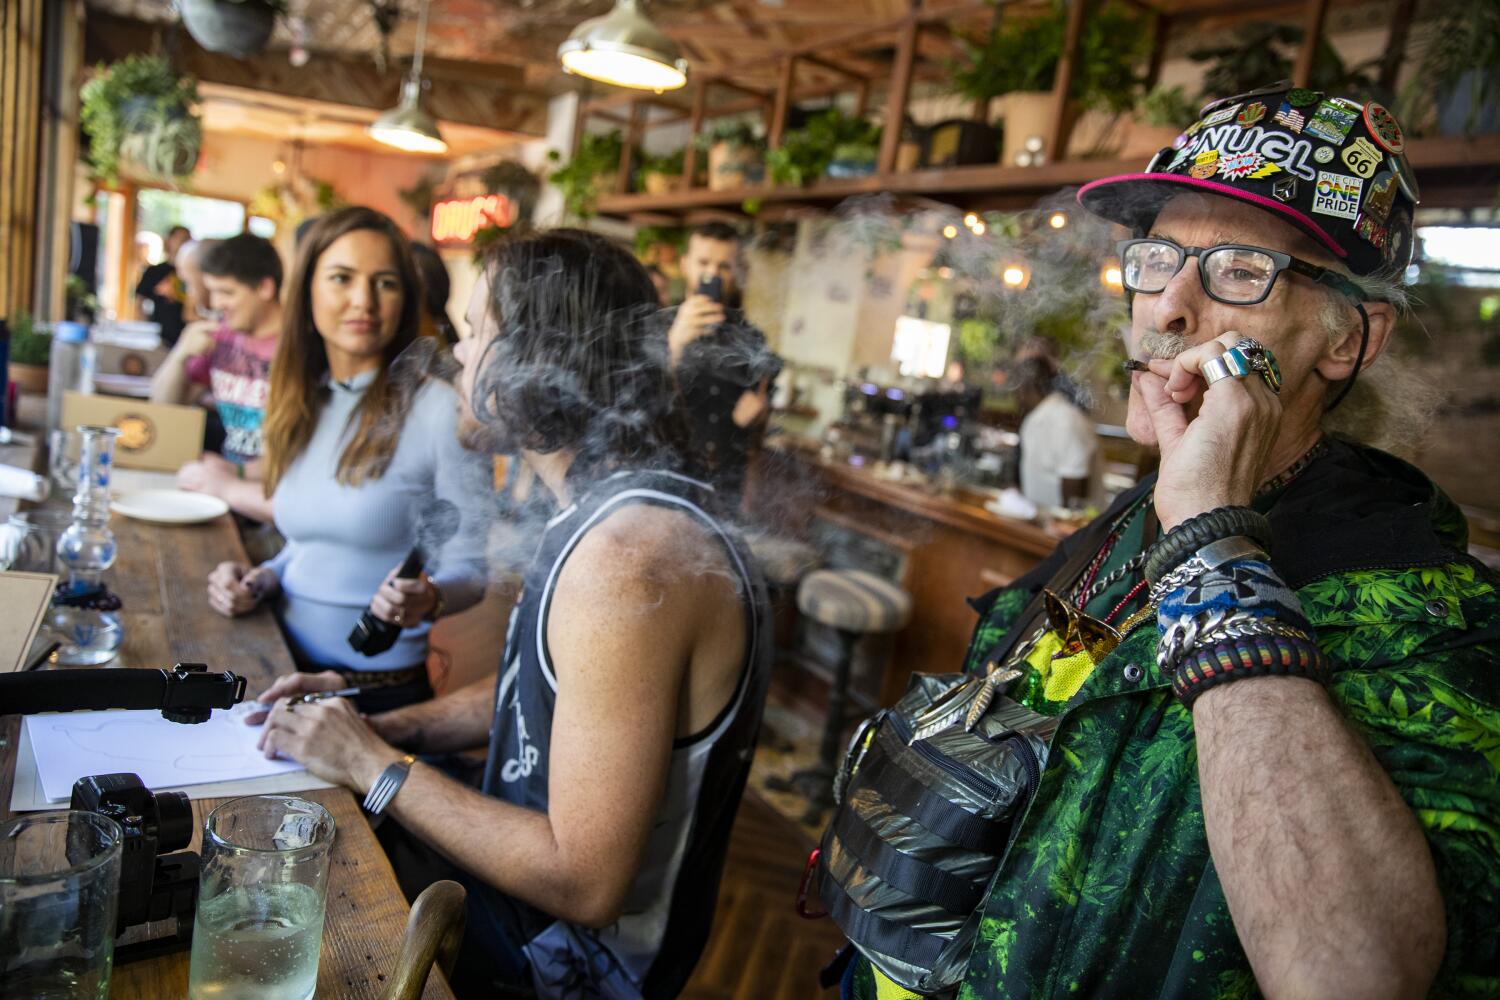 Bill to allow Amsterdam-style cannabis cafes in California goes up in smoke with Newsom veto